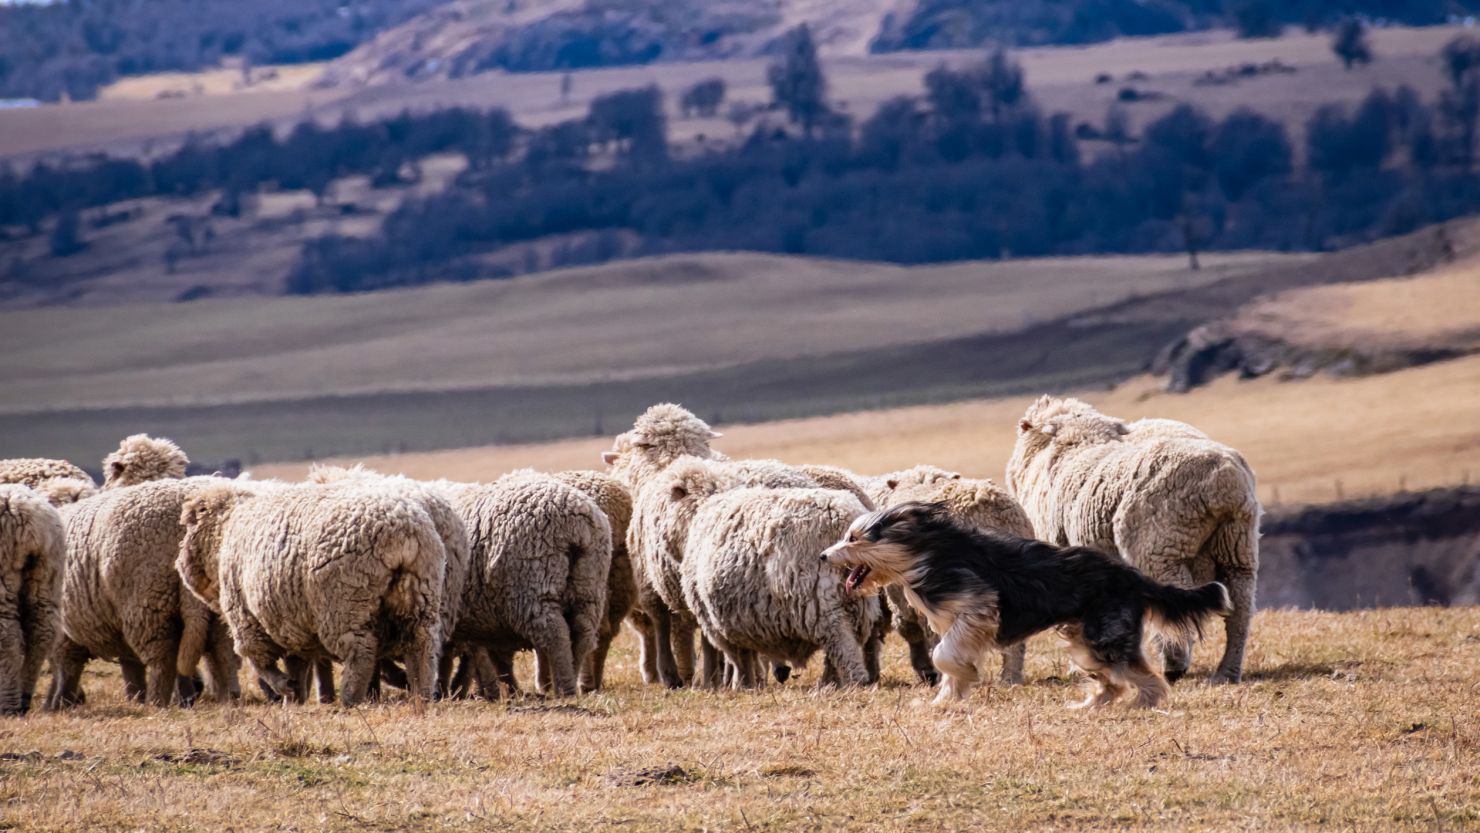 Sheepdogs were brought from the UK to South America to herd sheep.